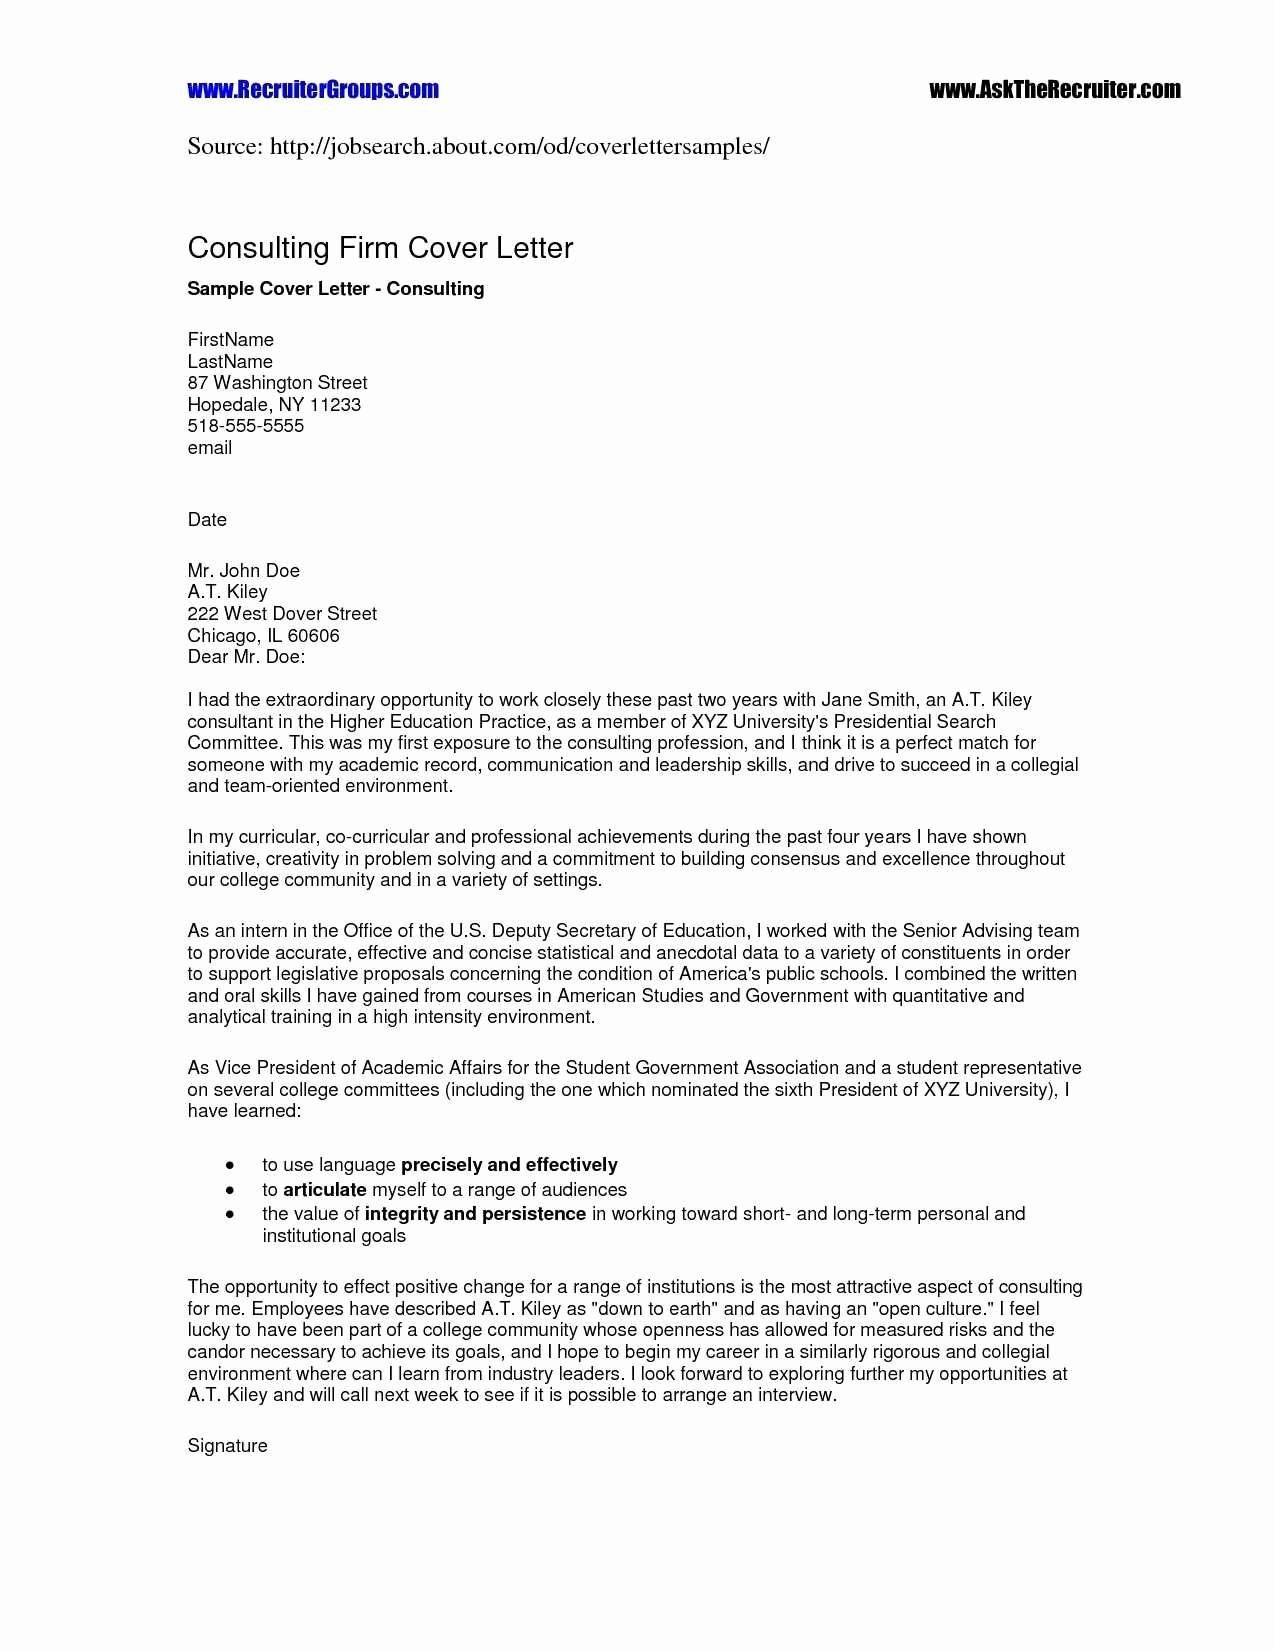 cover letter opening sentence examples